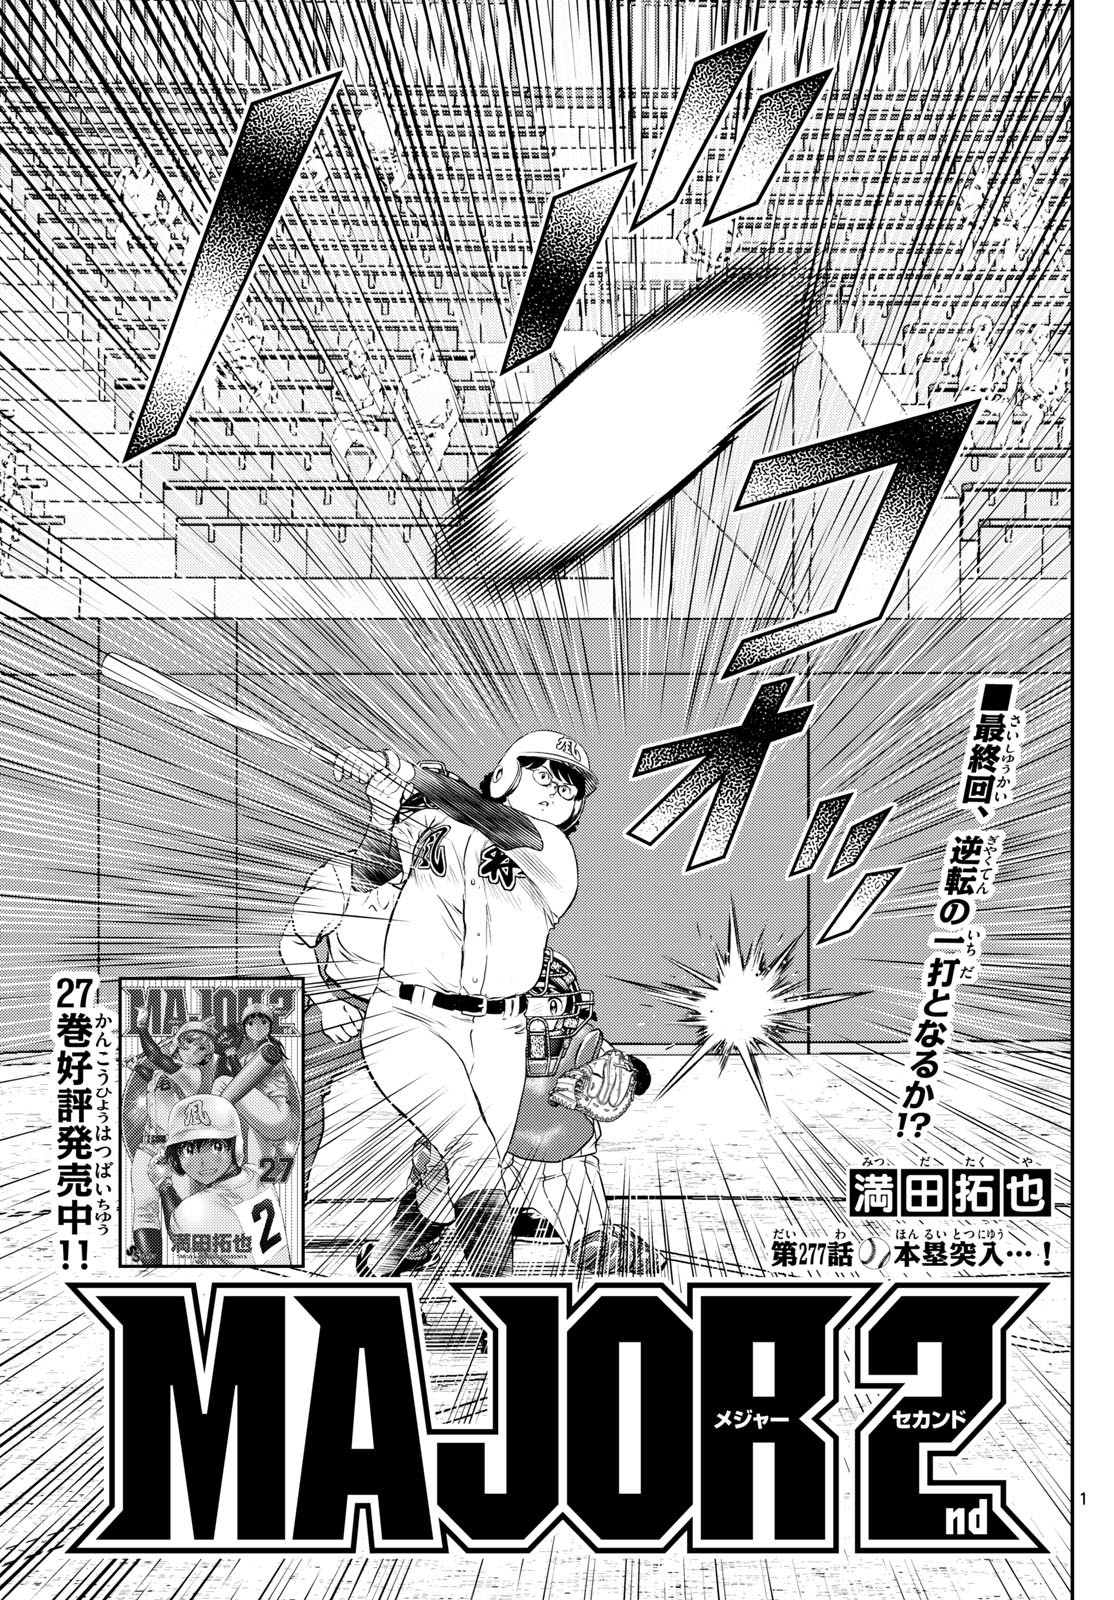 Major 2nd - メジャーセカンド - Chapter 277 - Page 1